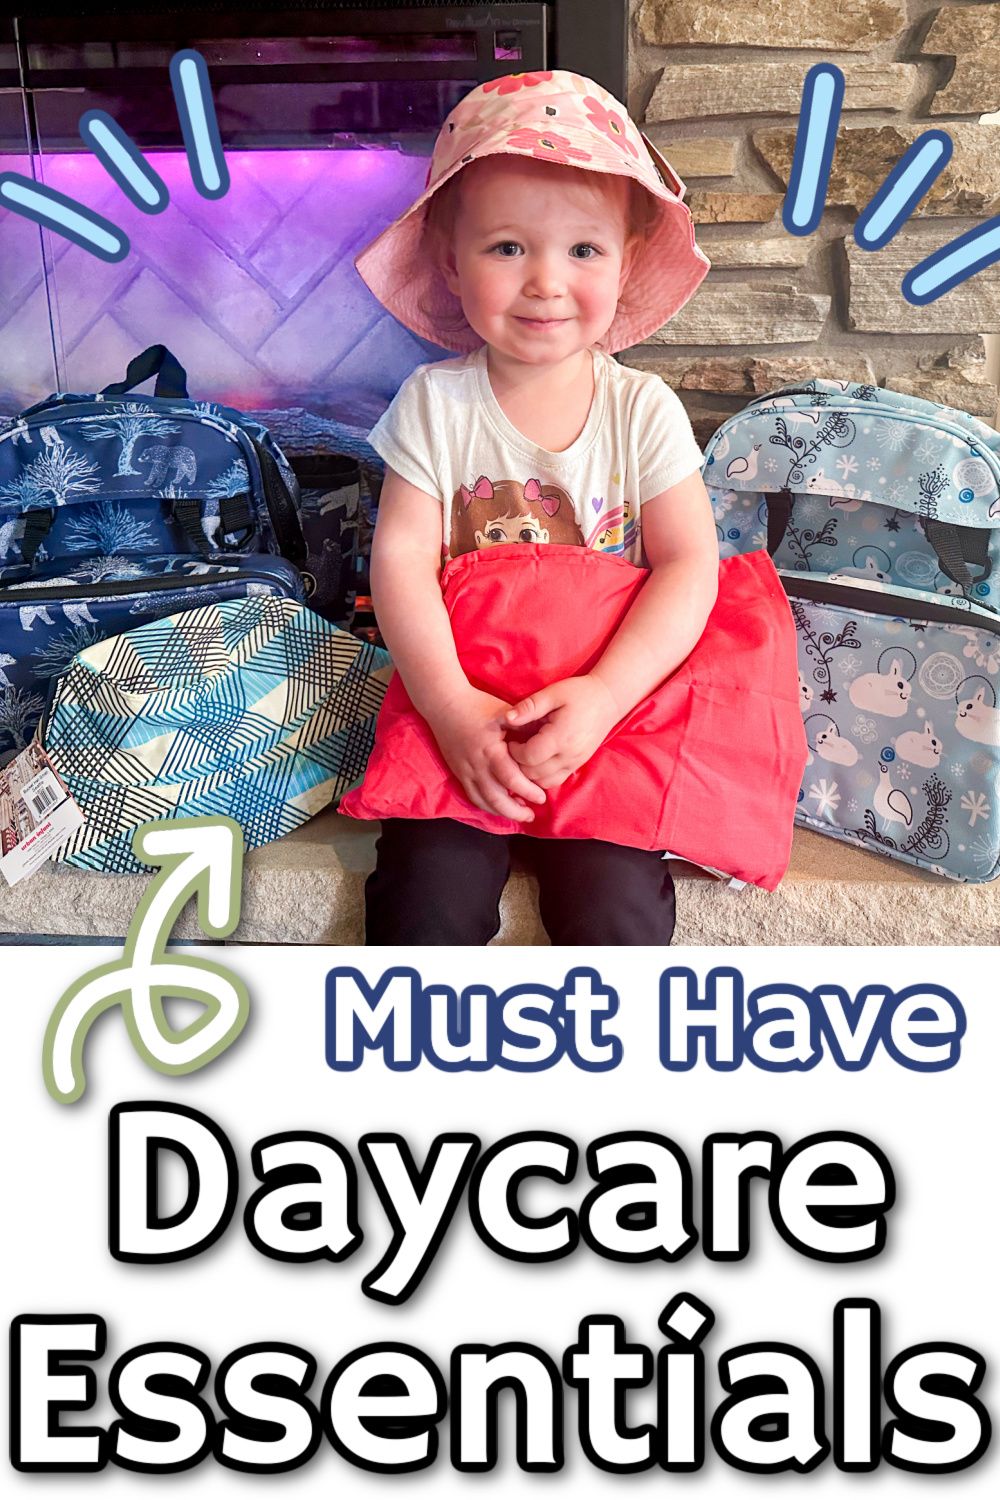 Daycare Essentials From Urban Infant